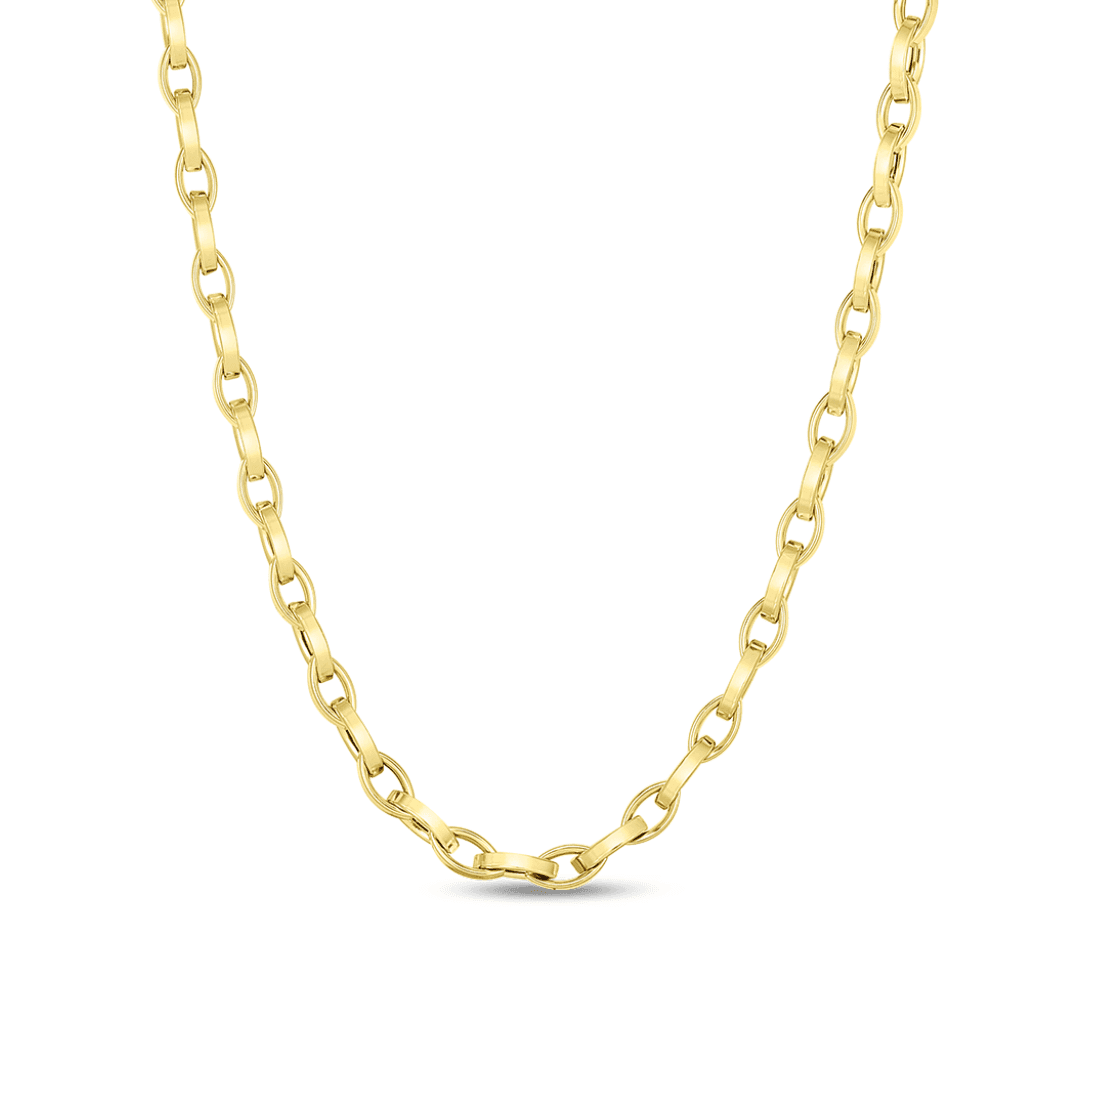 Roberto Coin 18k Polished Almond Link Necklace